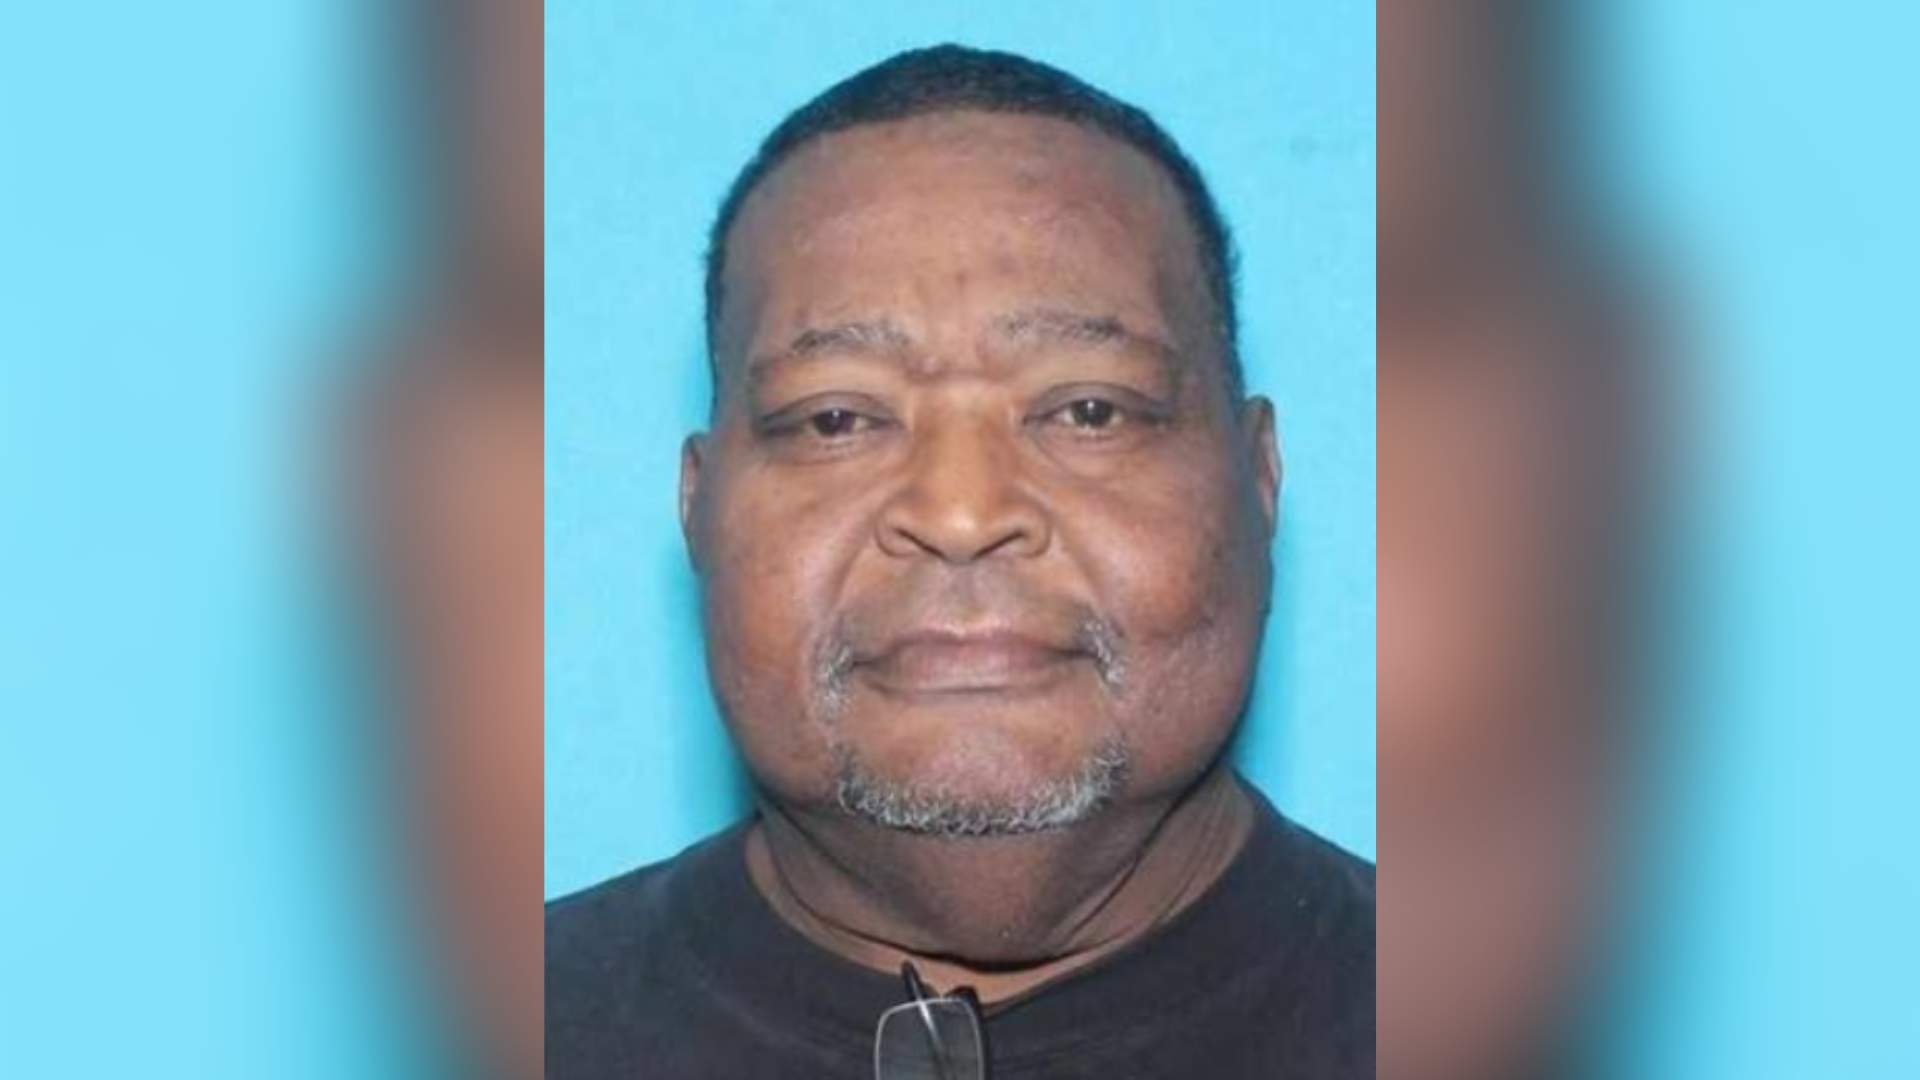 Houston police searching for man who went missing while en route to a hospital